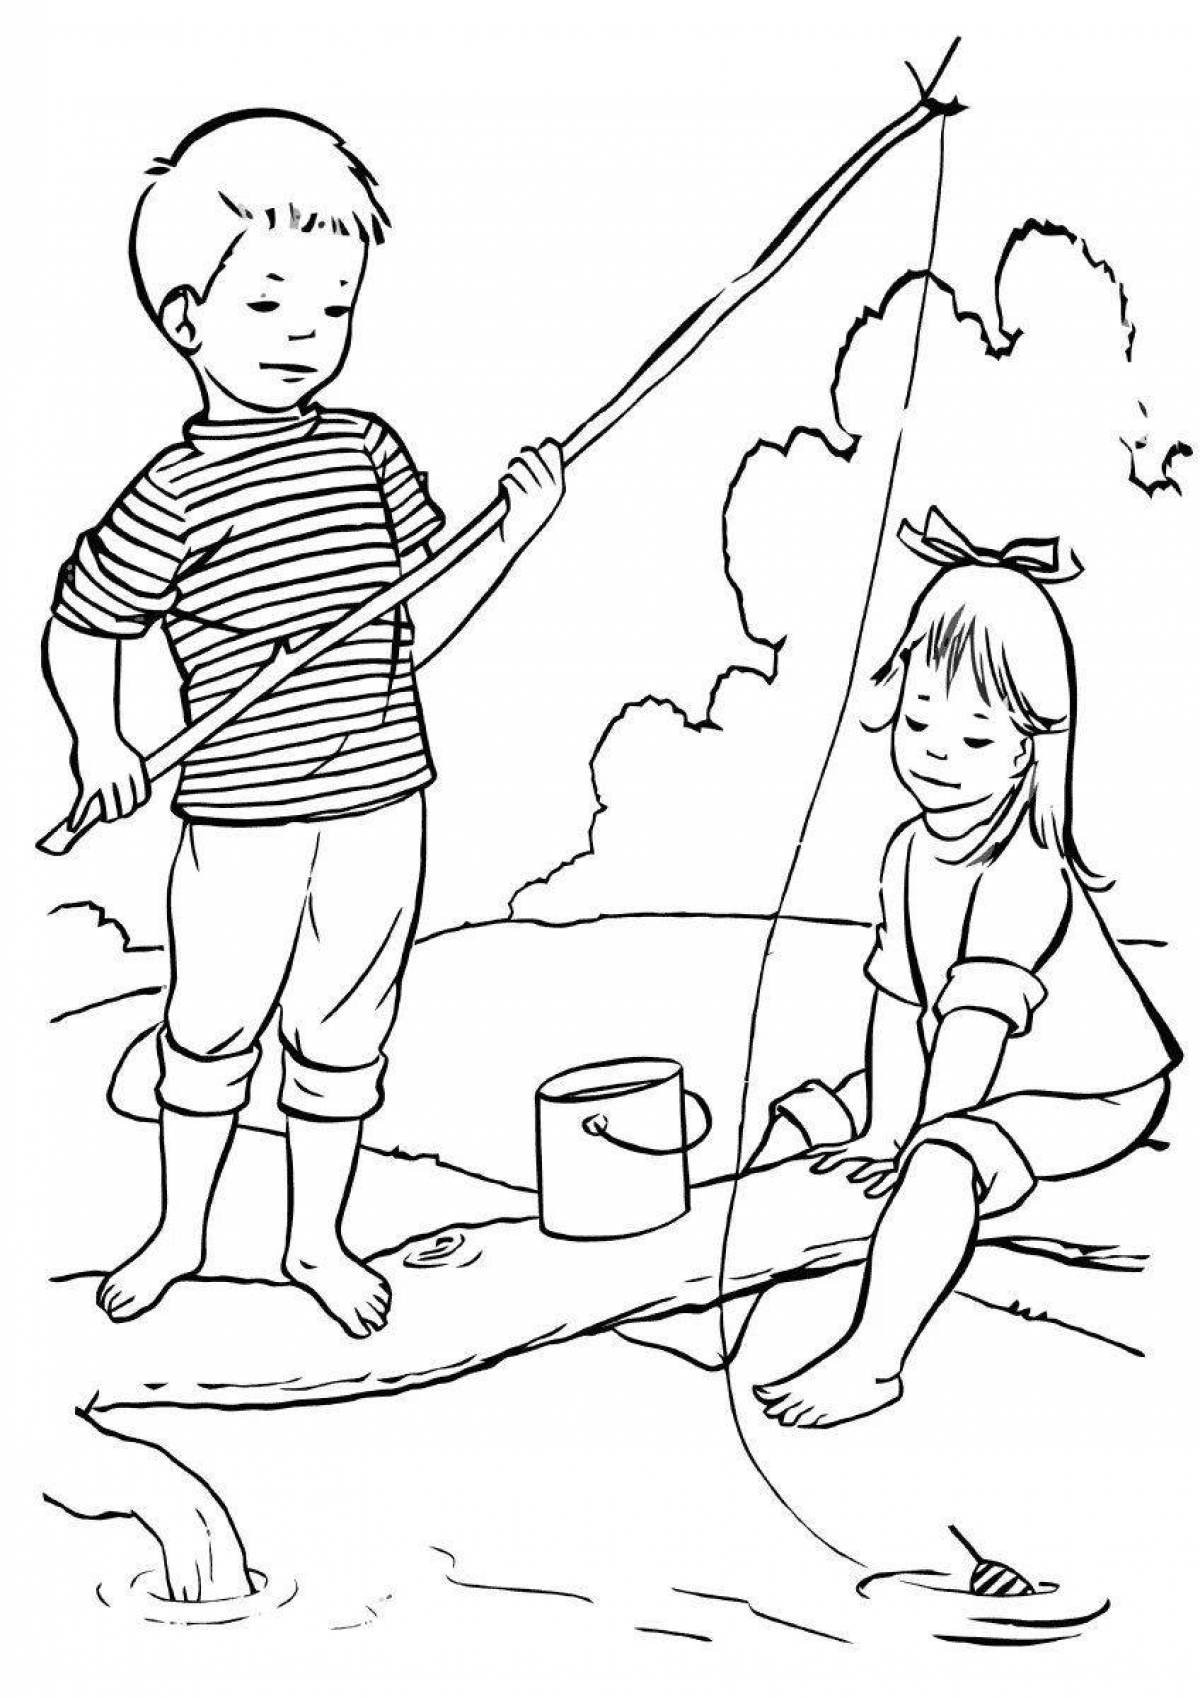 Playful fishing rod coloring page for kids